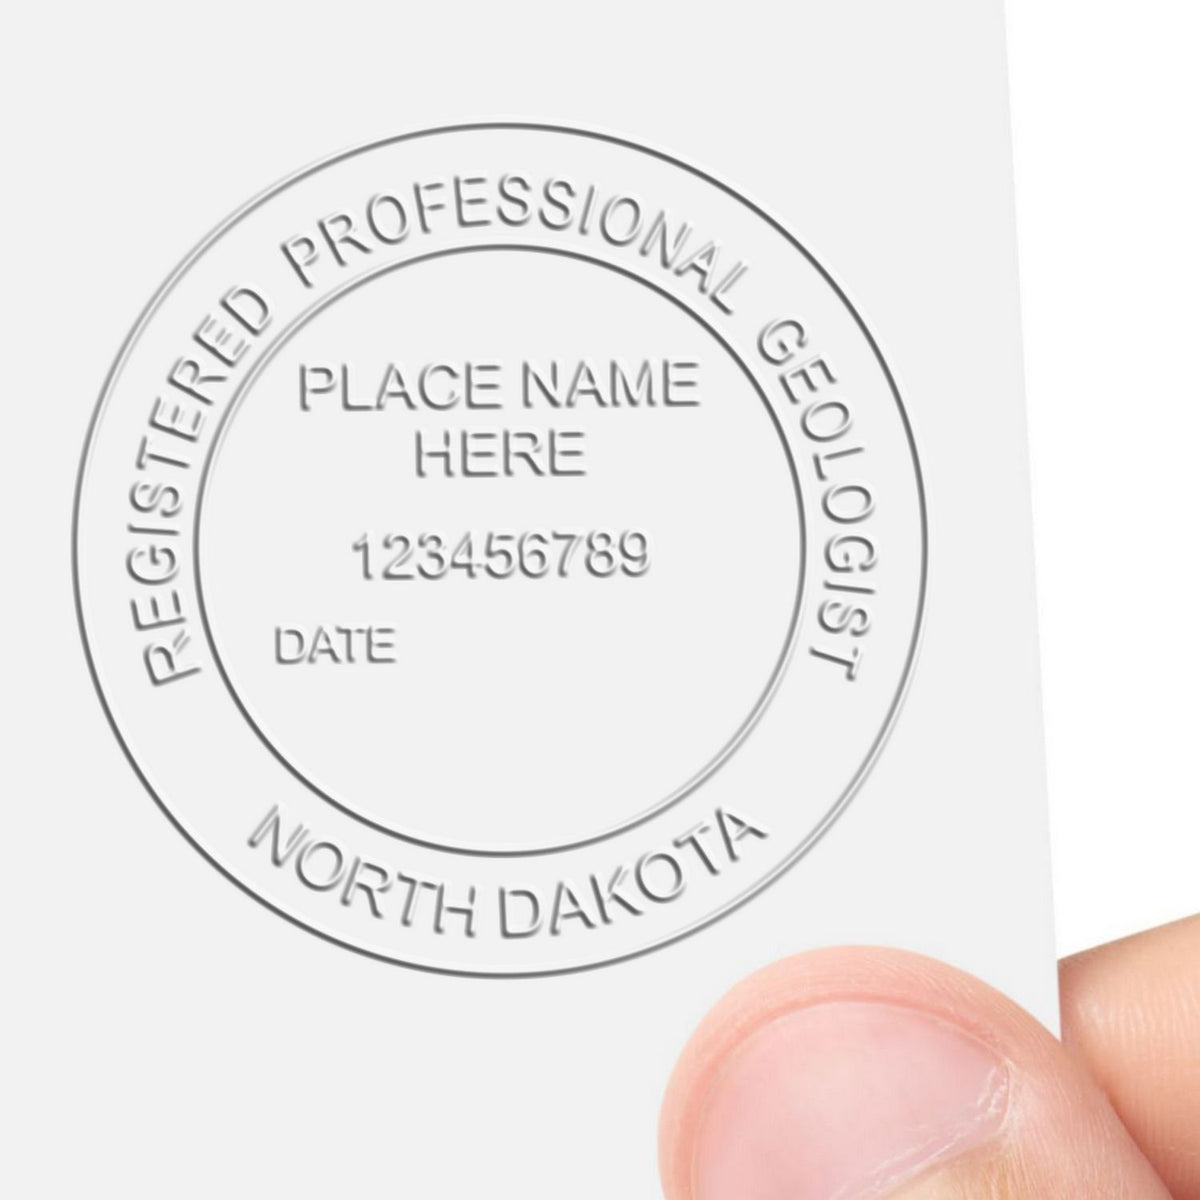 An in use photo of the Soft North Dakota Professional Geologist Seal showing a sample imprint on a cardstock